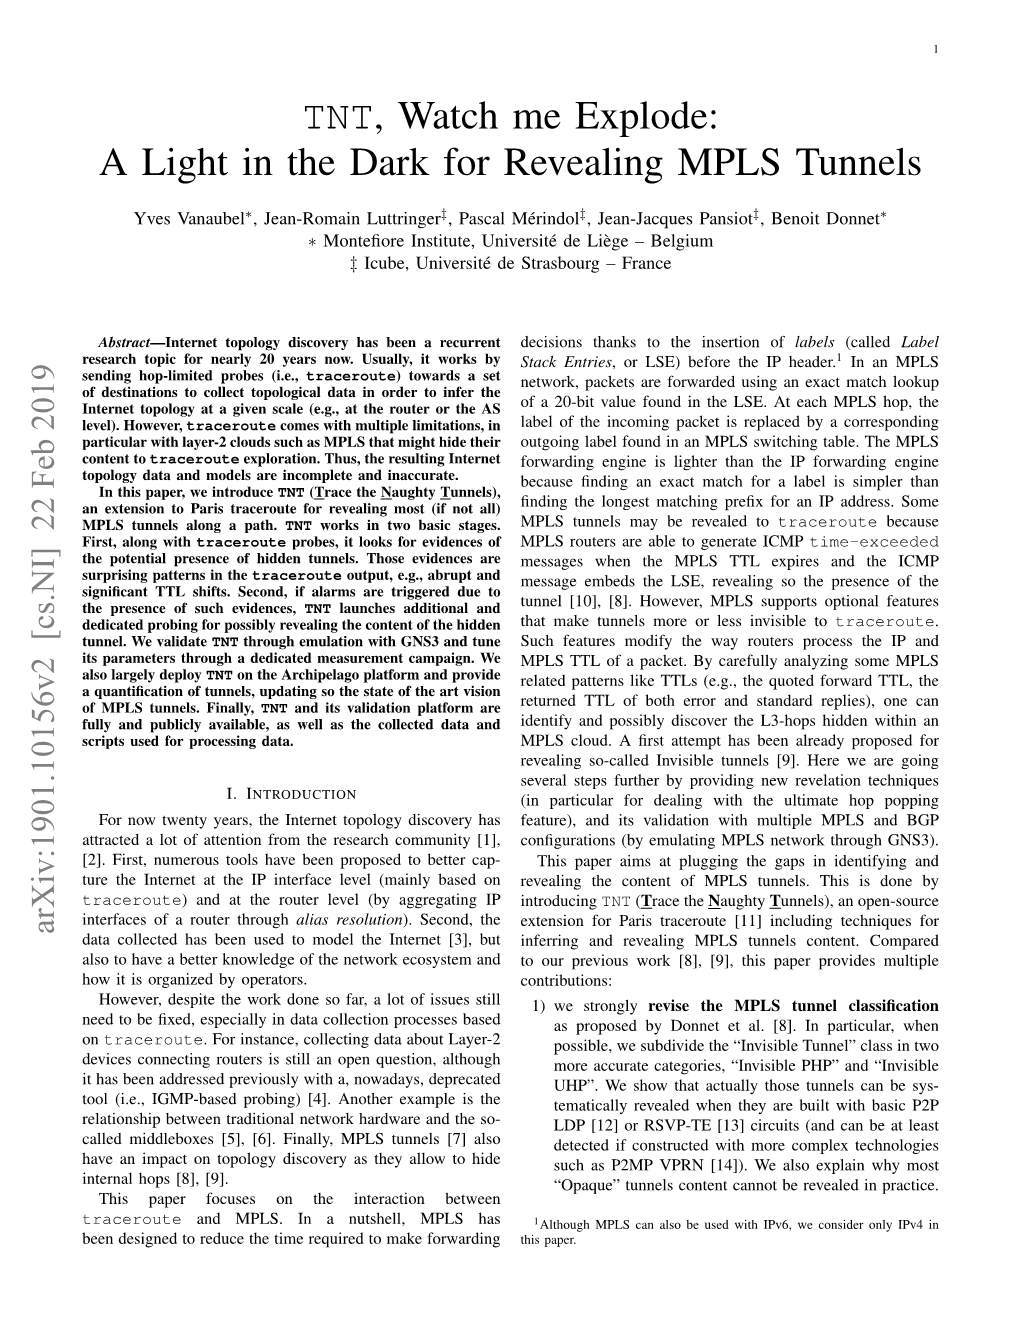 TNT, Watch Me Explode: a Light in the Dark for Revealing MPLS Tunnels